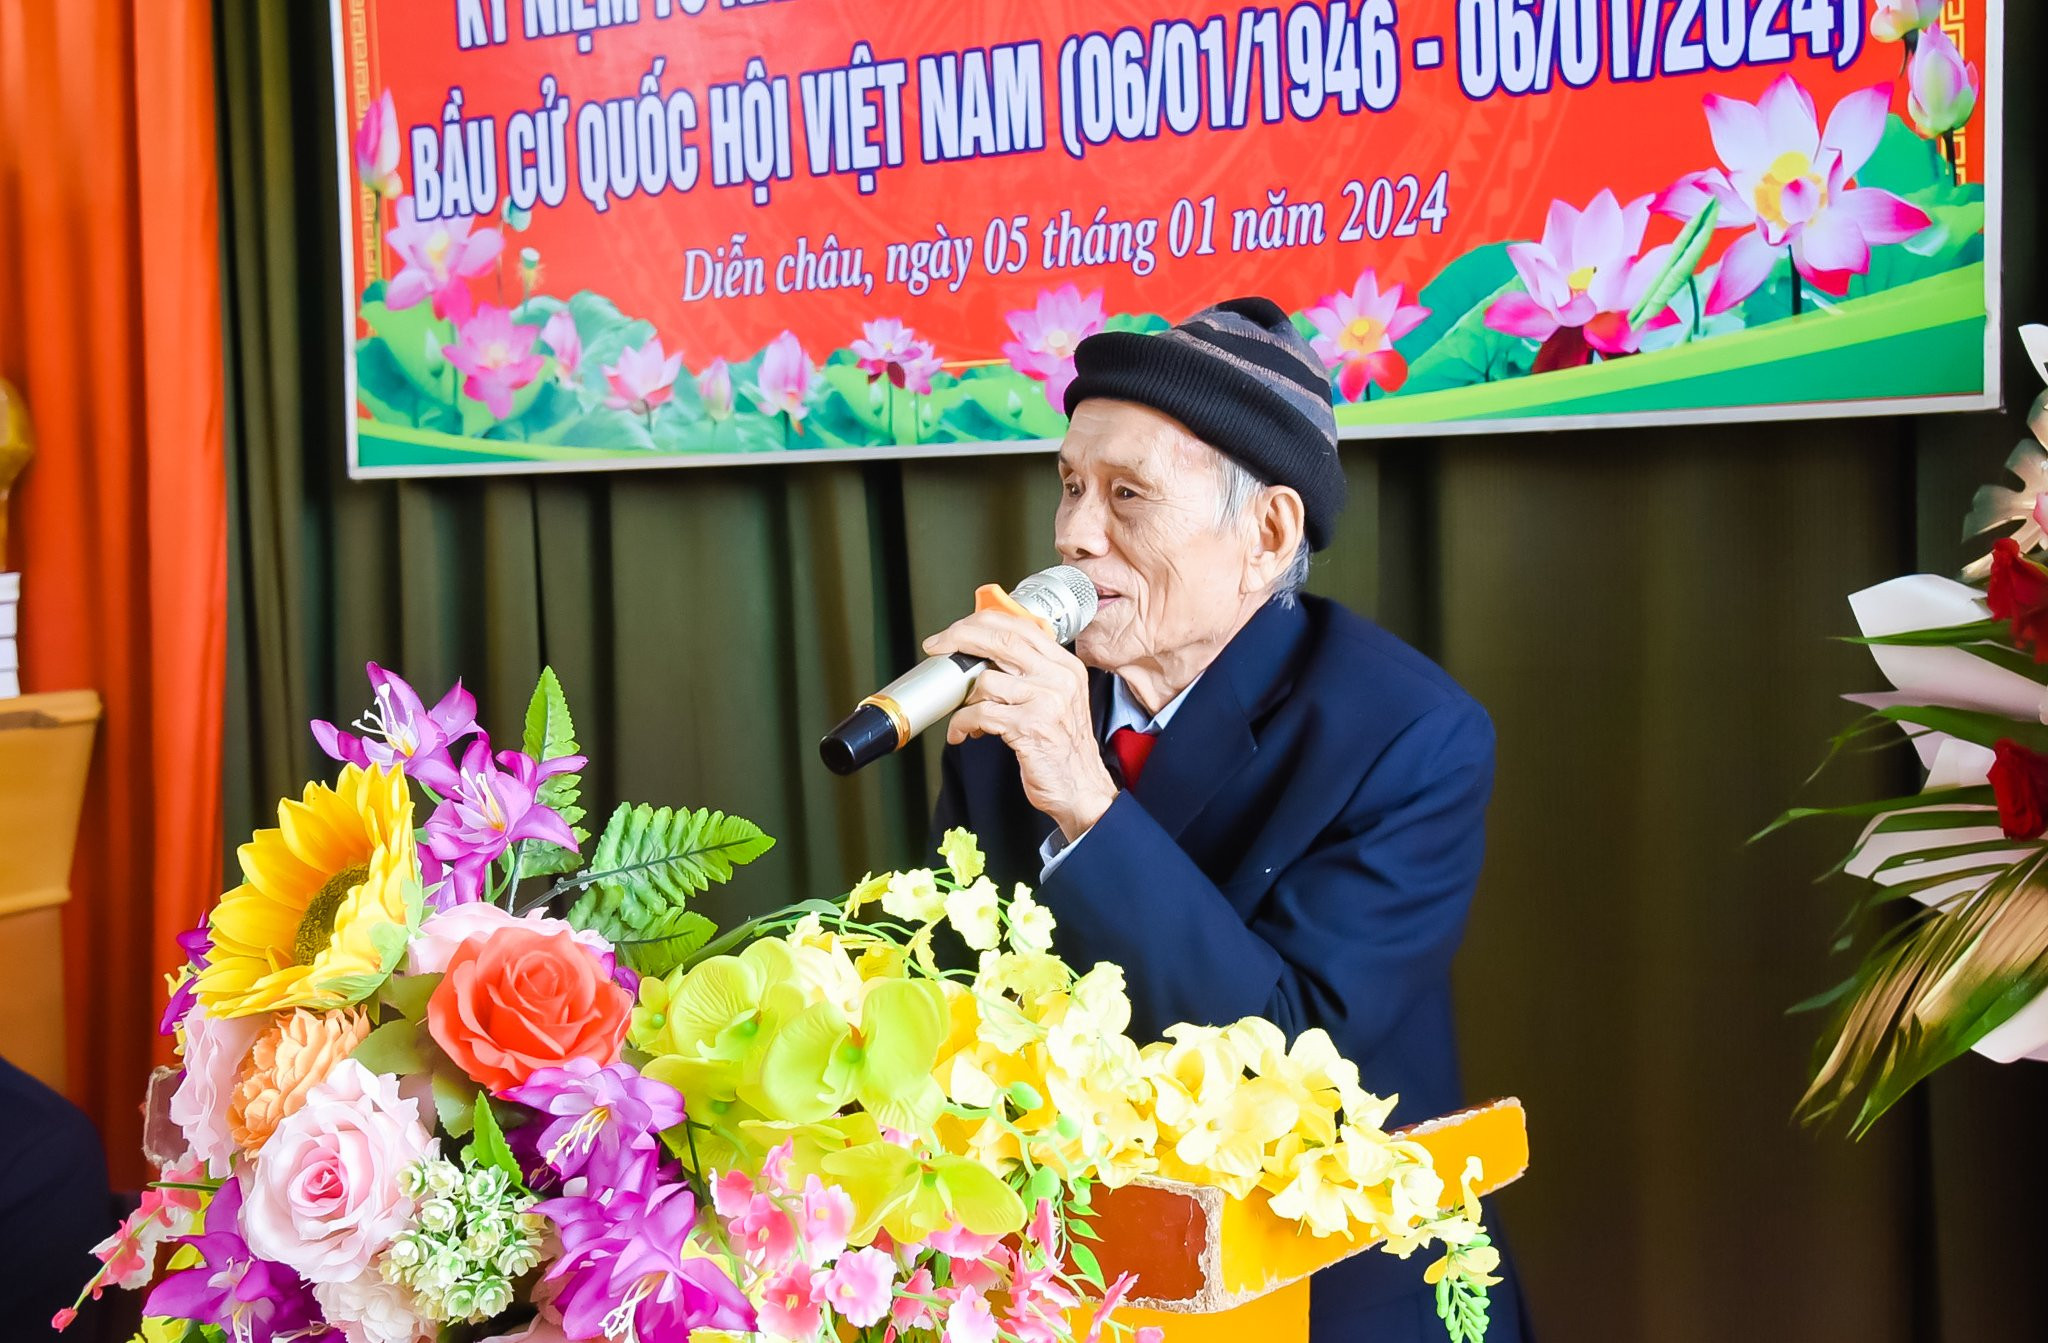 bna-anh-thay-hanh-anh-thanh-le-2567.jpg